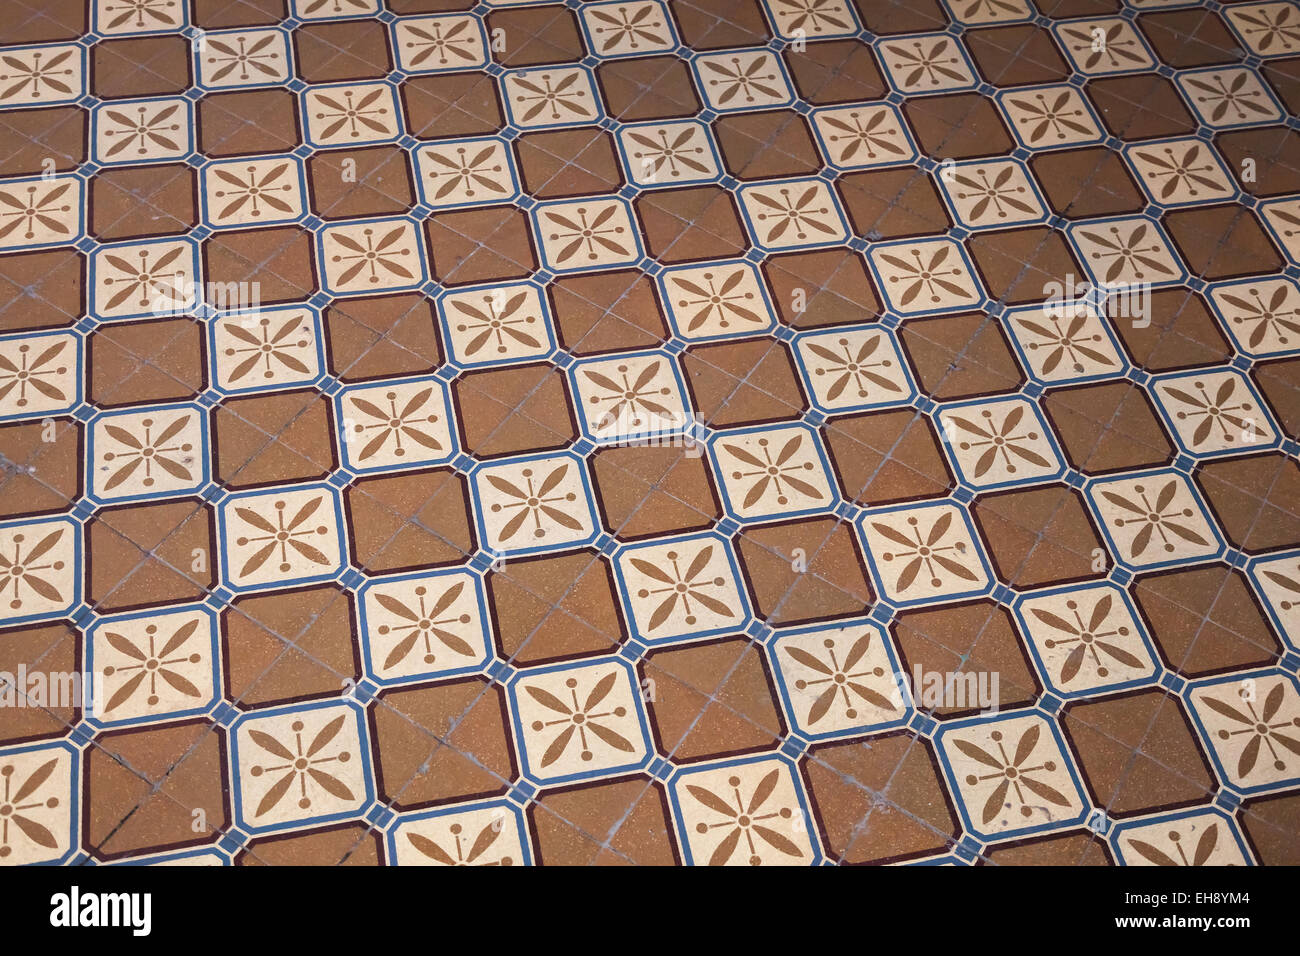 Old colorful tiling on the floor, retro style Stock Photo